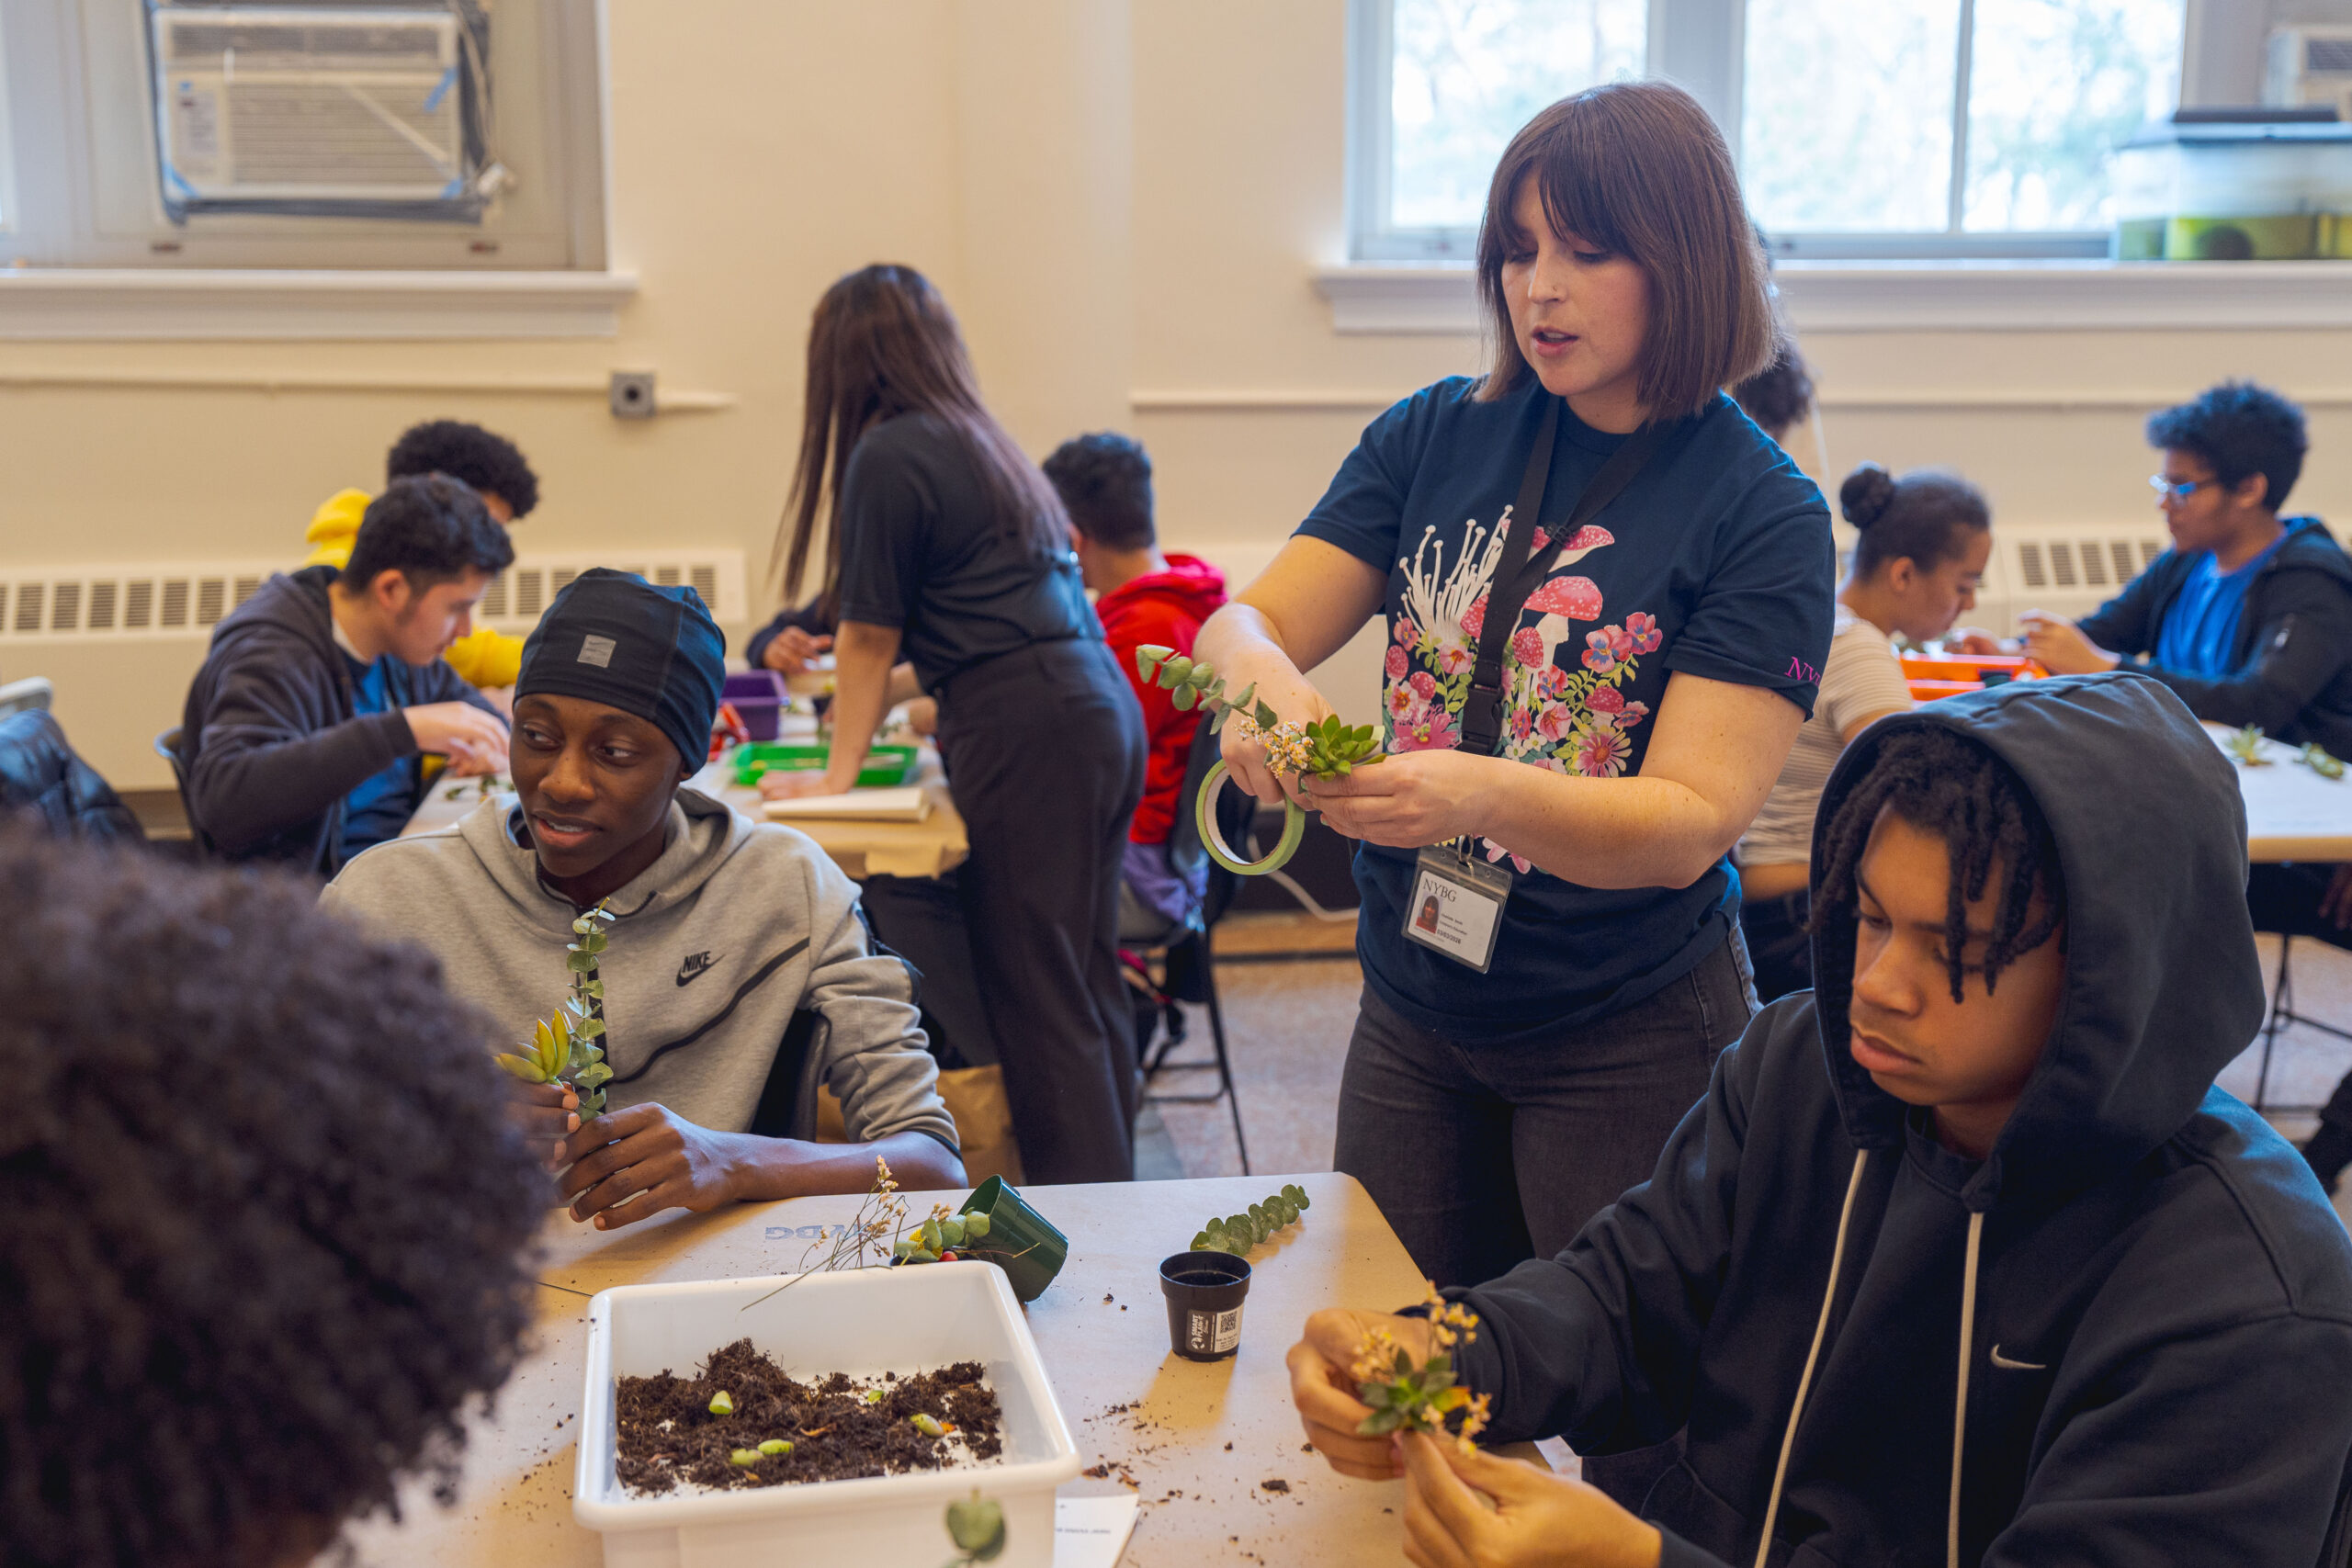 Students take part in a workshop with NYBG staff